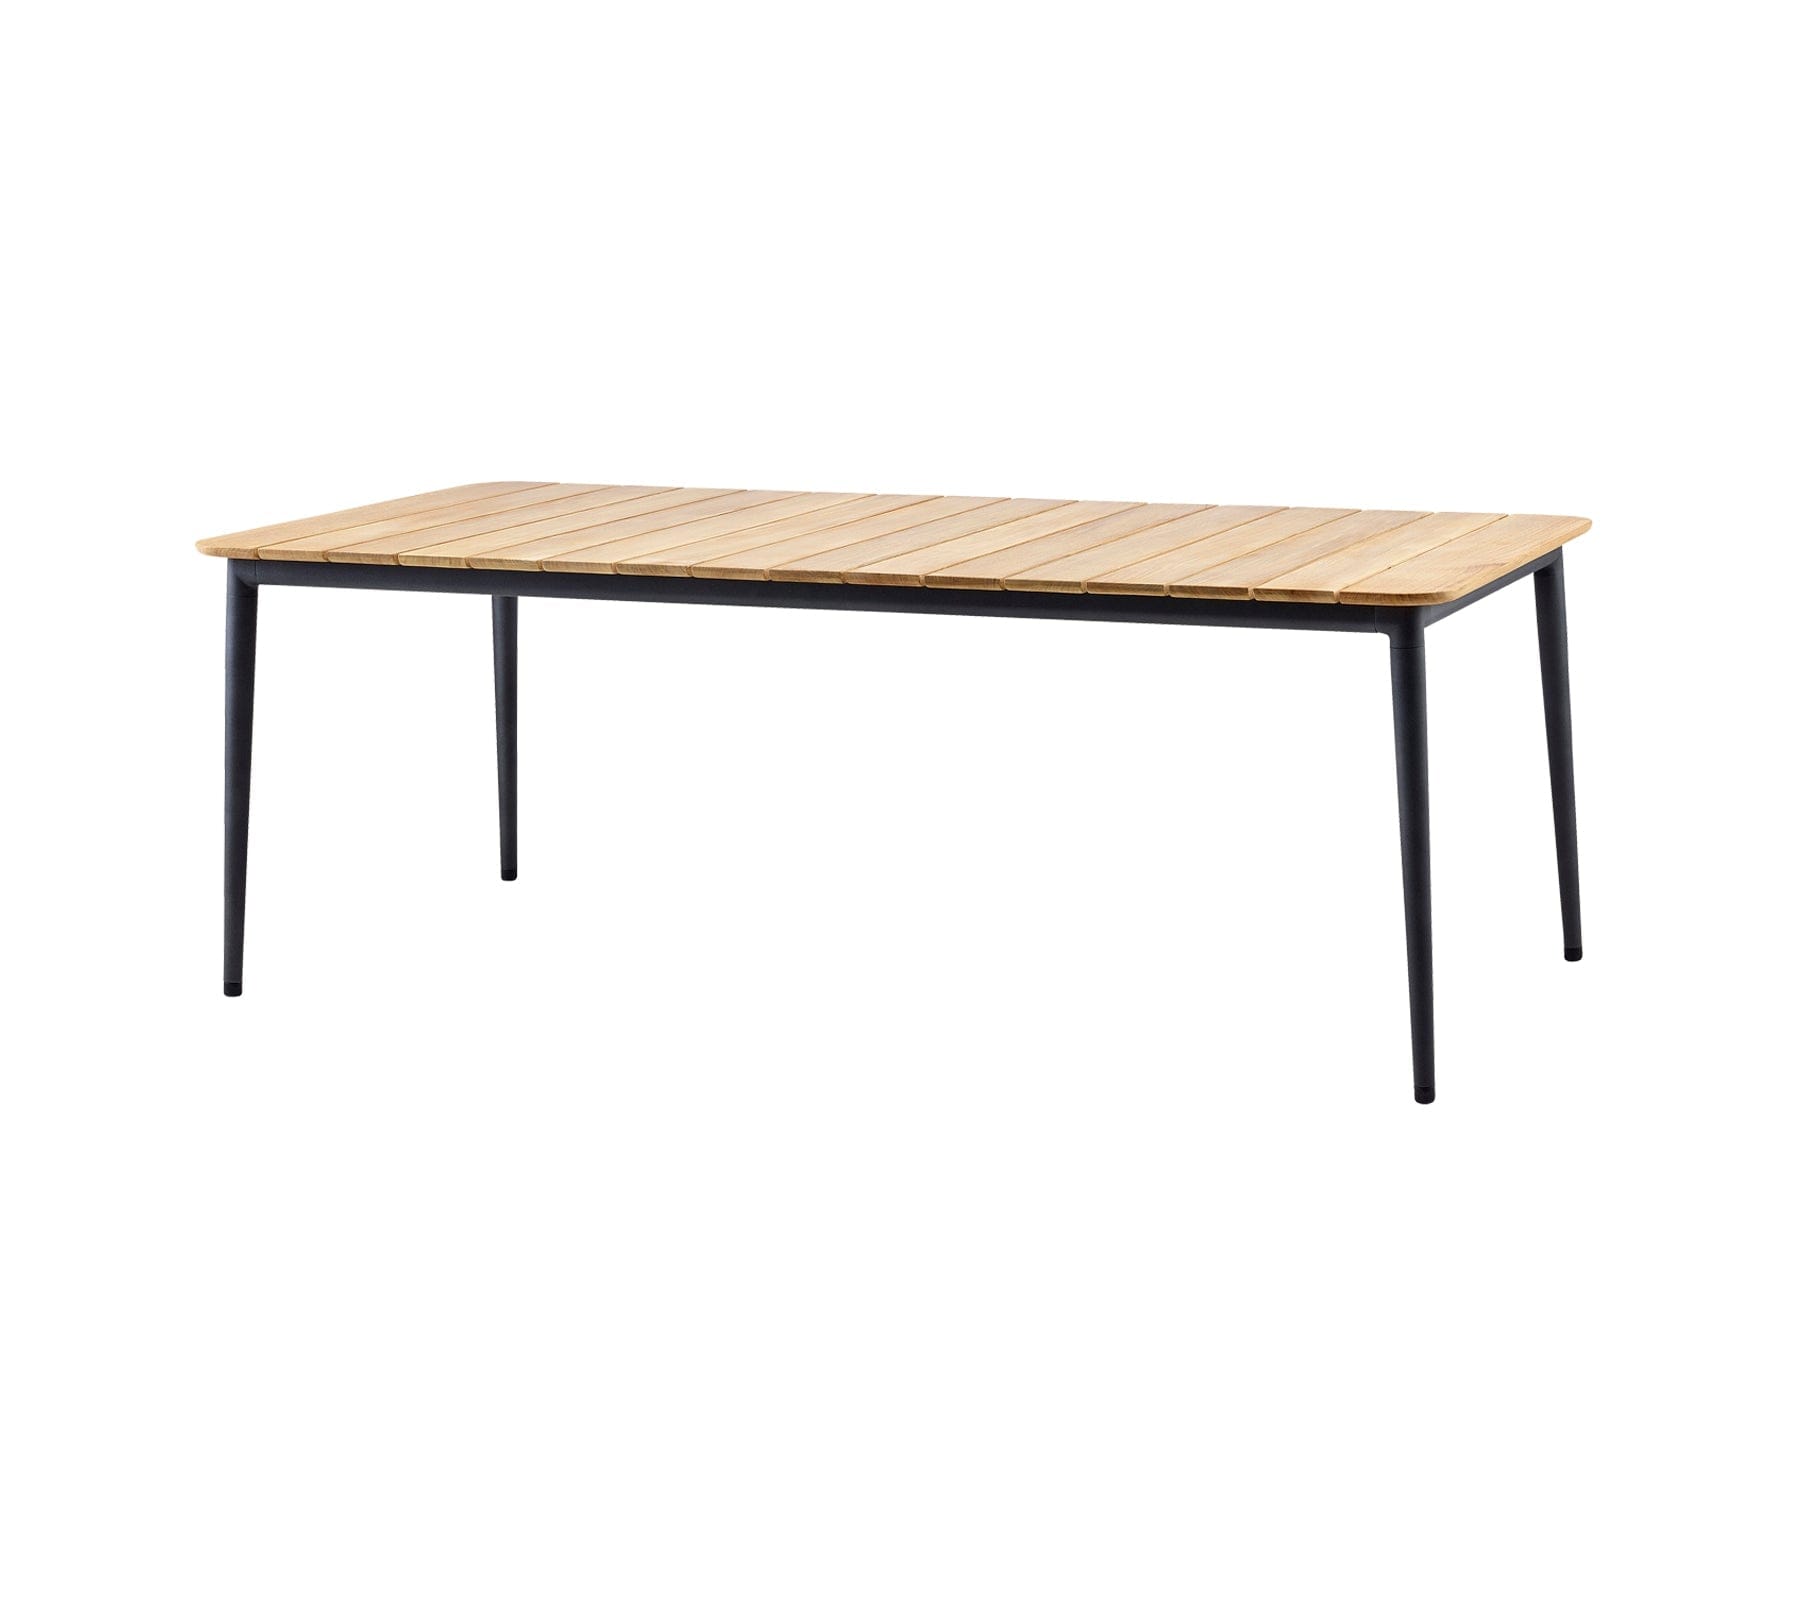 Boxhill's Core Garden Dining Table Lava Grey in white background